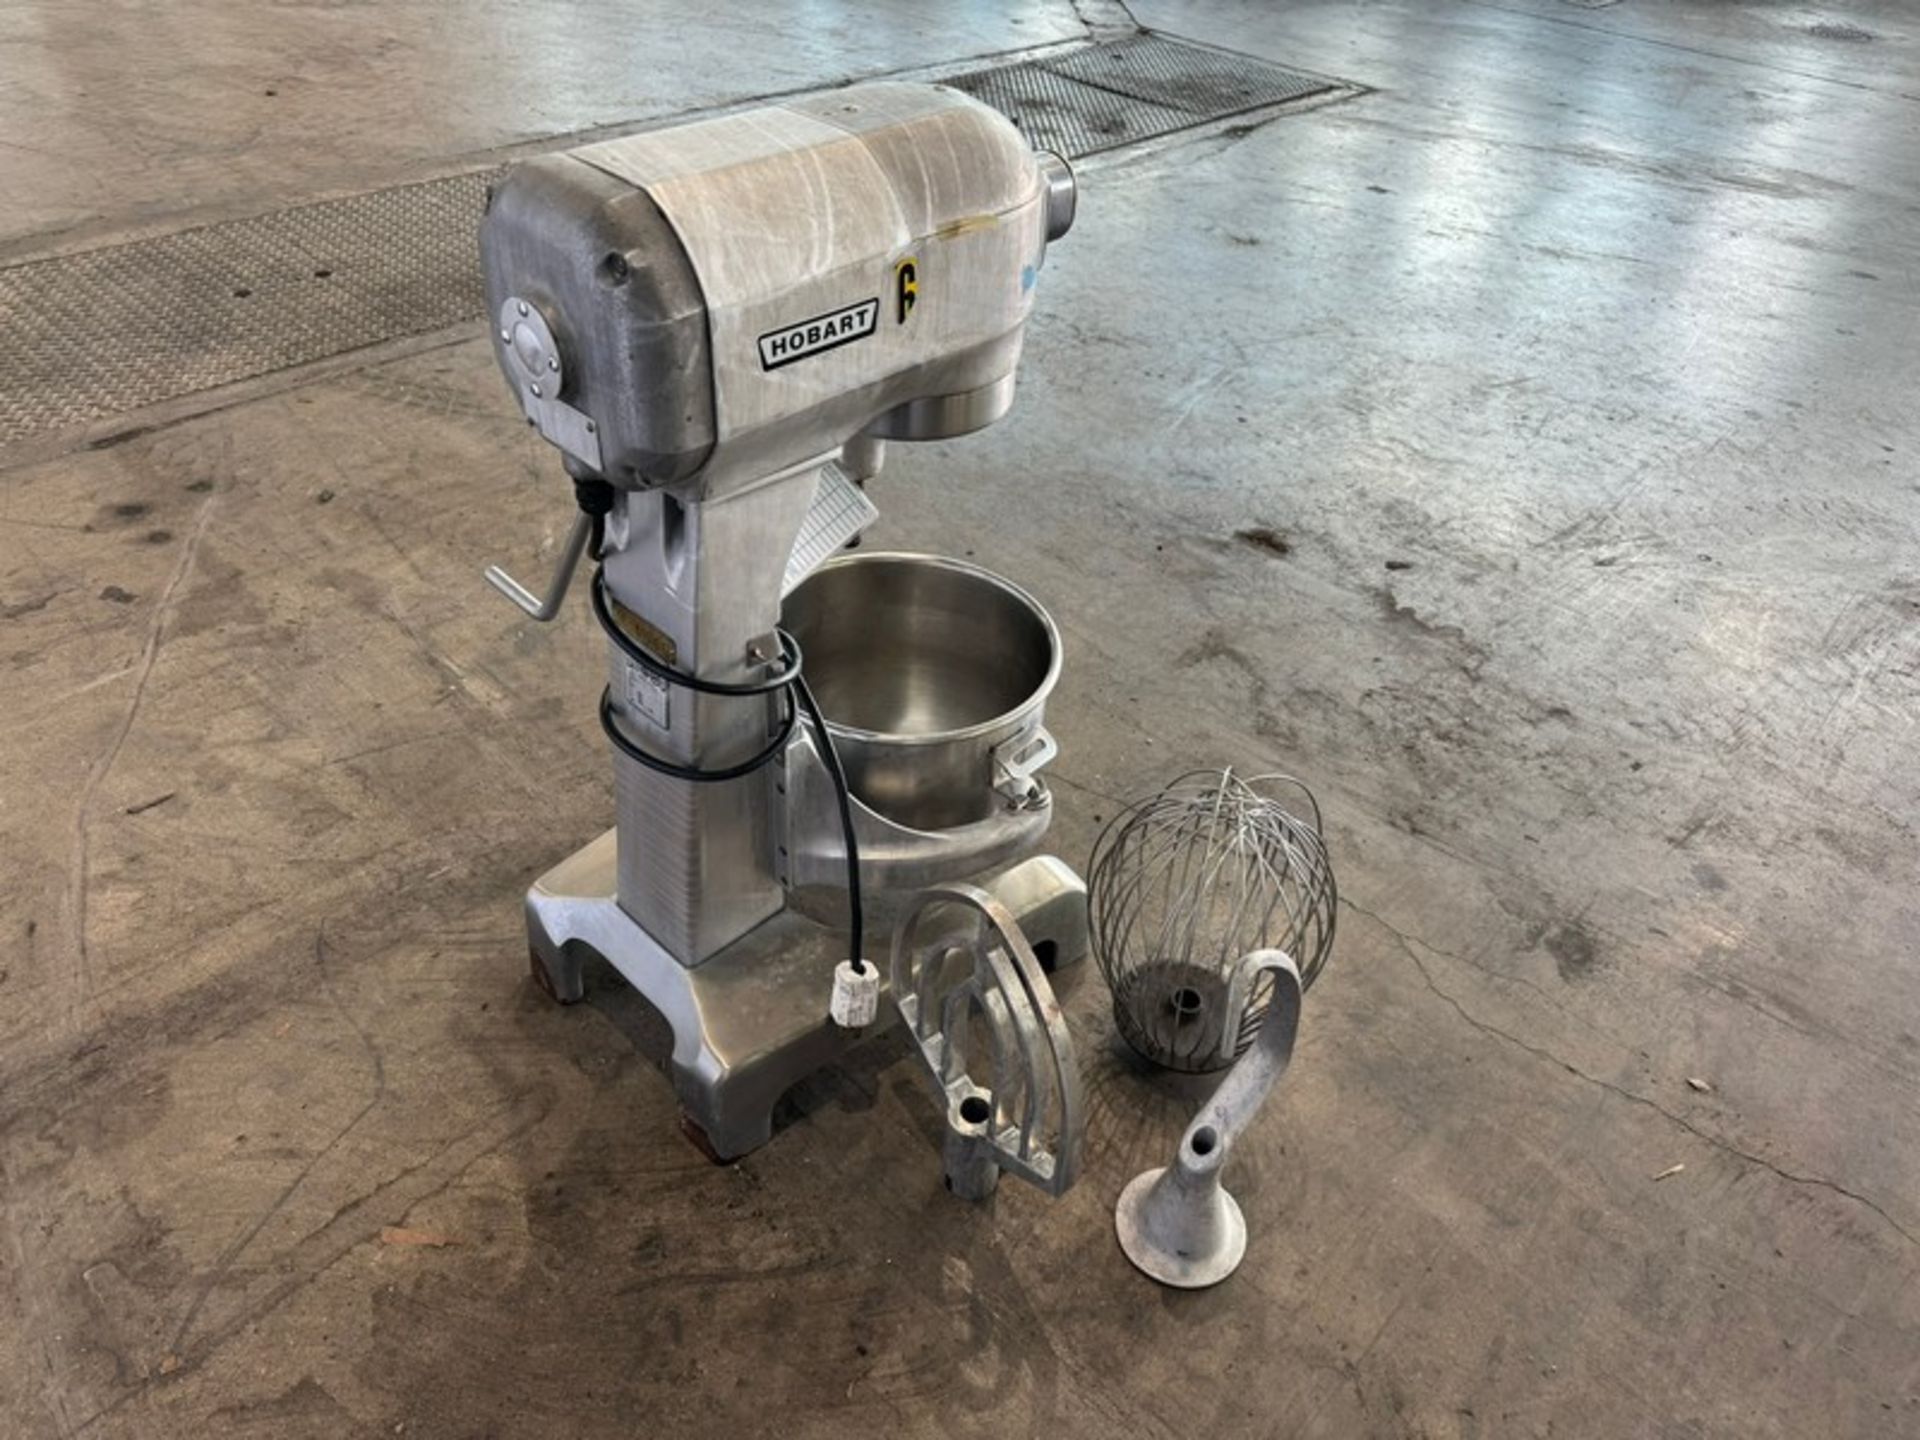 Hobart Mixer, M/N A-200DT, S/N 11-413-046, 115 Volts, 1725 RPM, with S/S Mixing Bowl, Whip, & - Image 5 of 6